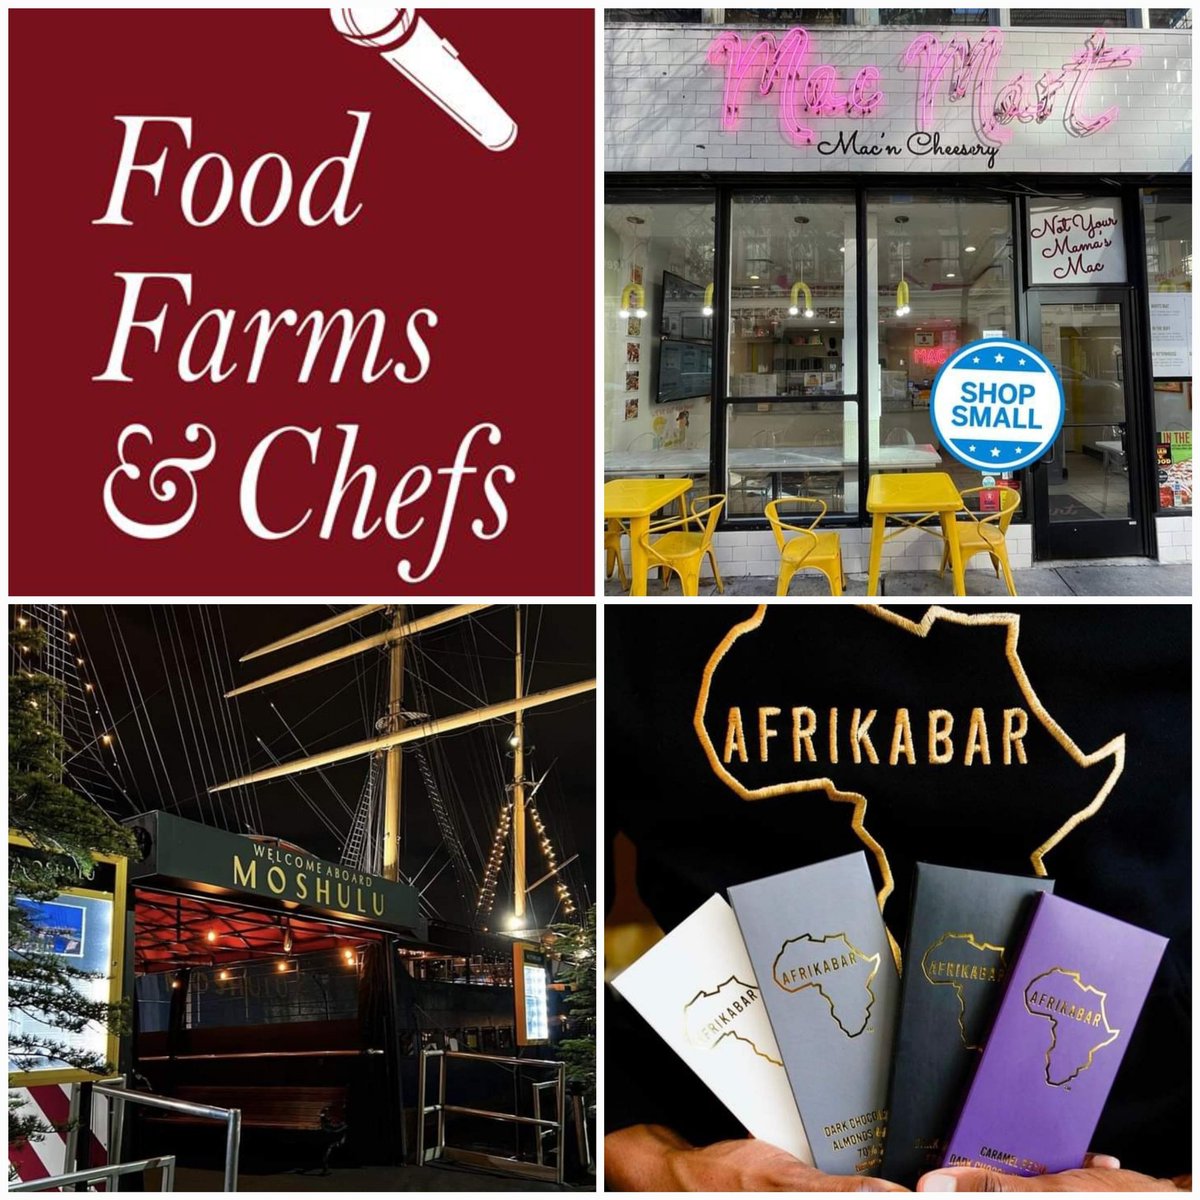 On this weeks @FoodFarmsnChefs, we spoke with @TheMacMart which focuses on everyone's favorite side dish, the #Moshulu on Delaware Avenue, and #AfrikaBar created for your tasting pleasure! Listen today at 6pm on WWDB & WPEN or stream us online at anytime!